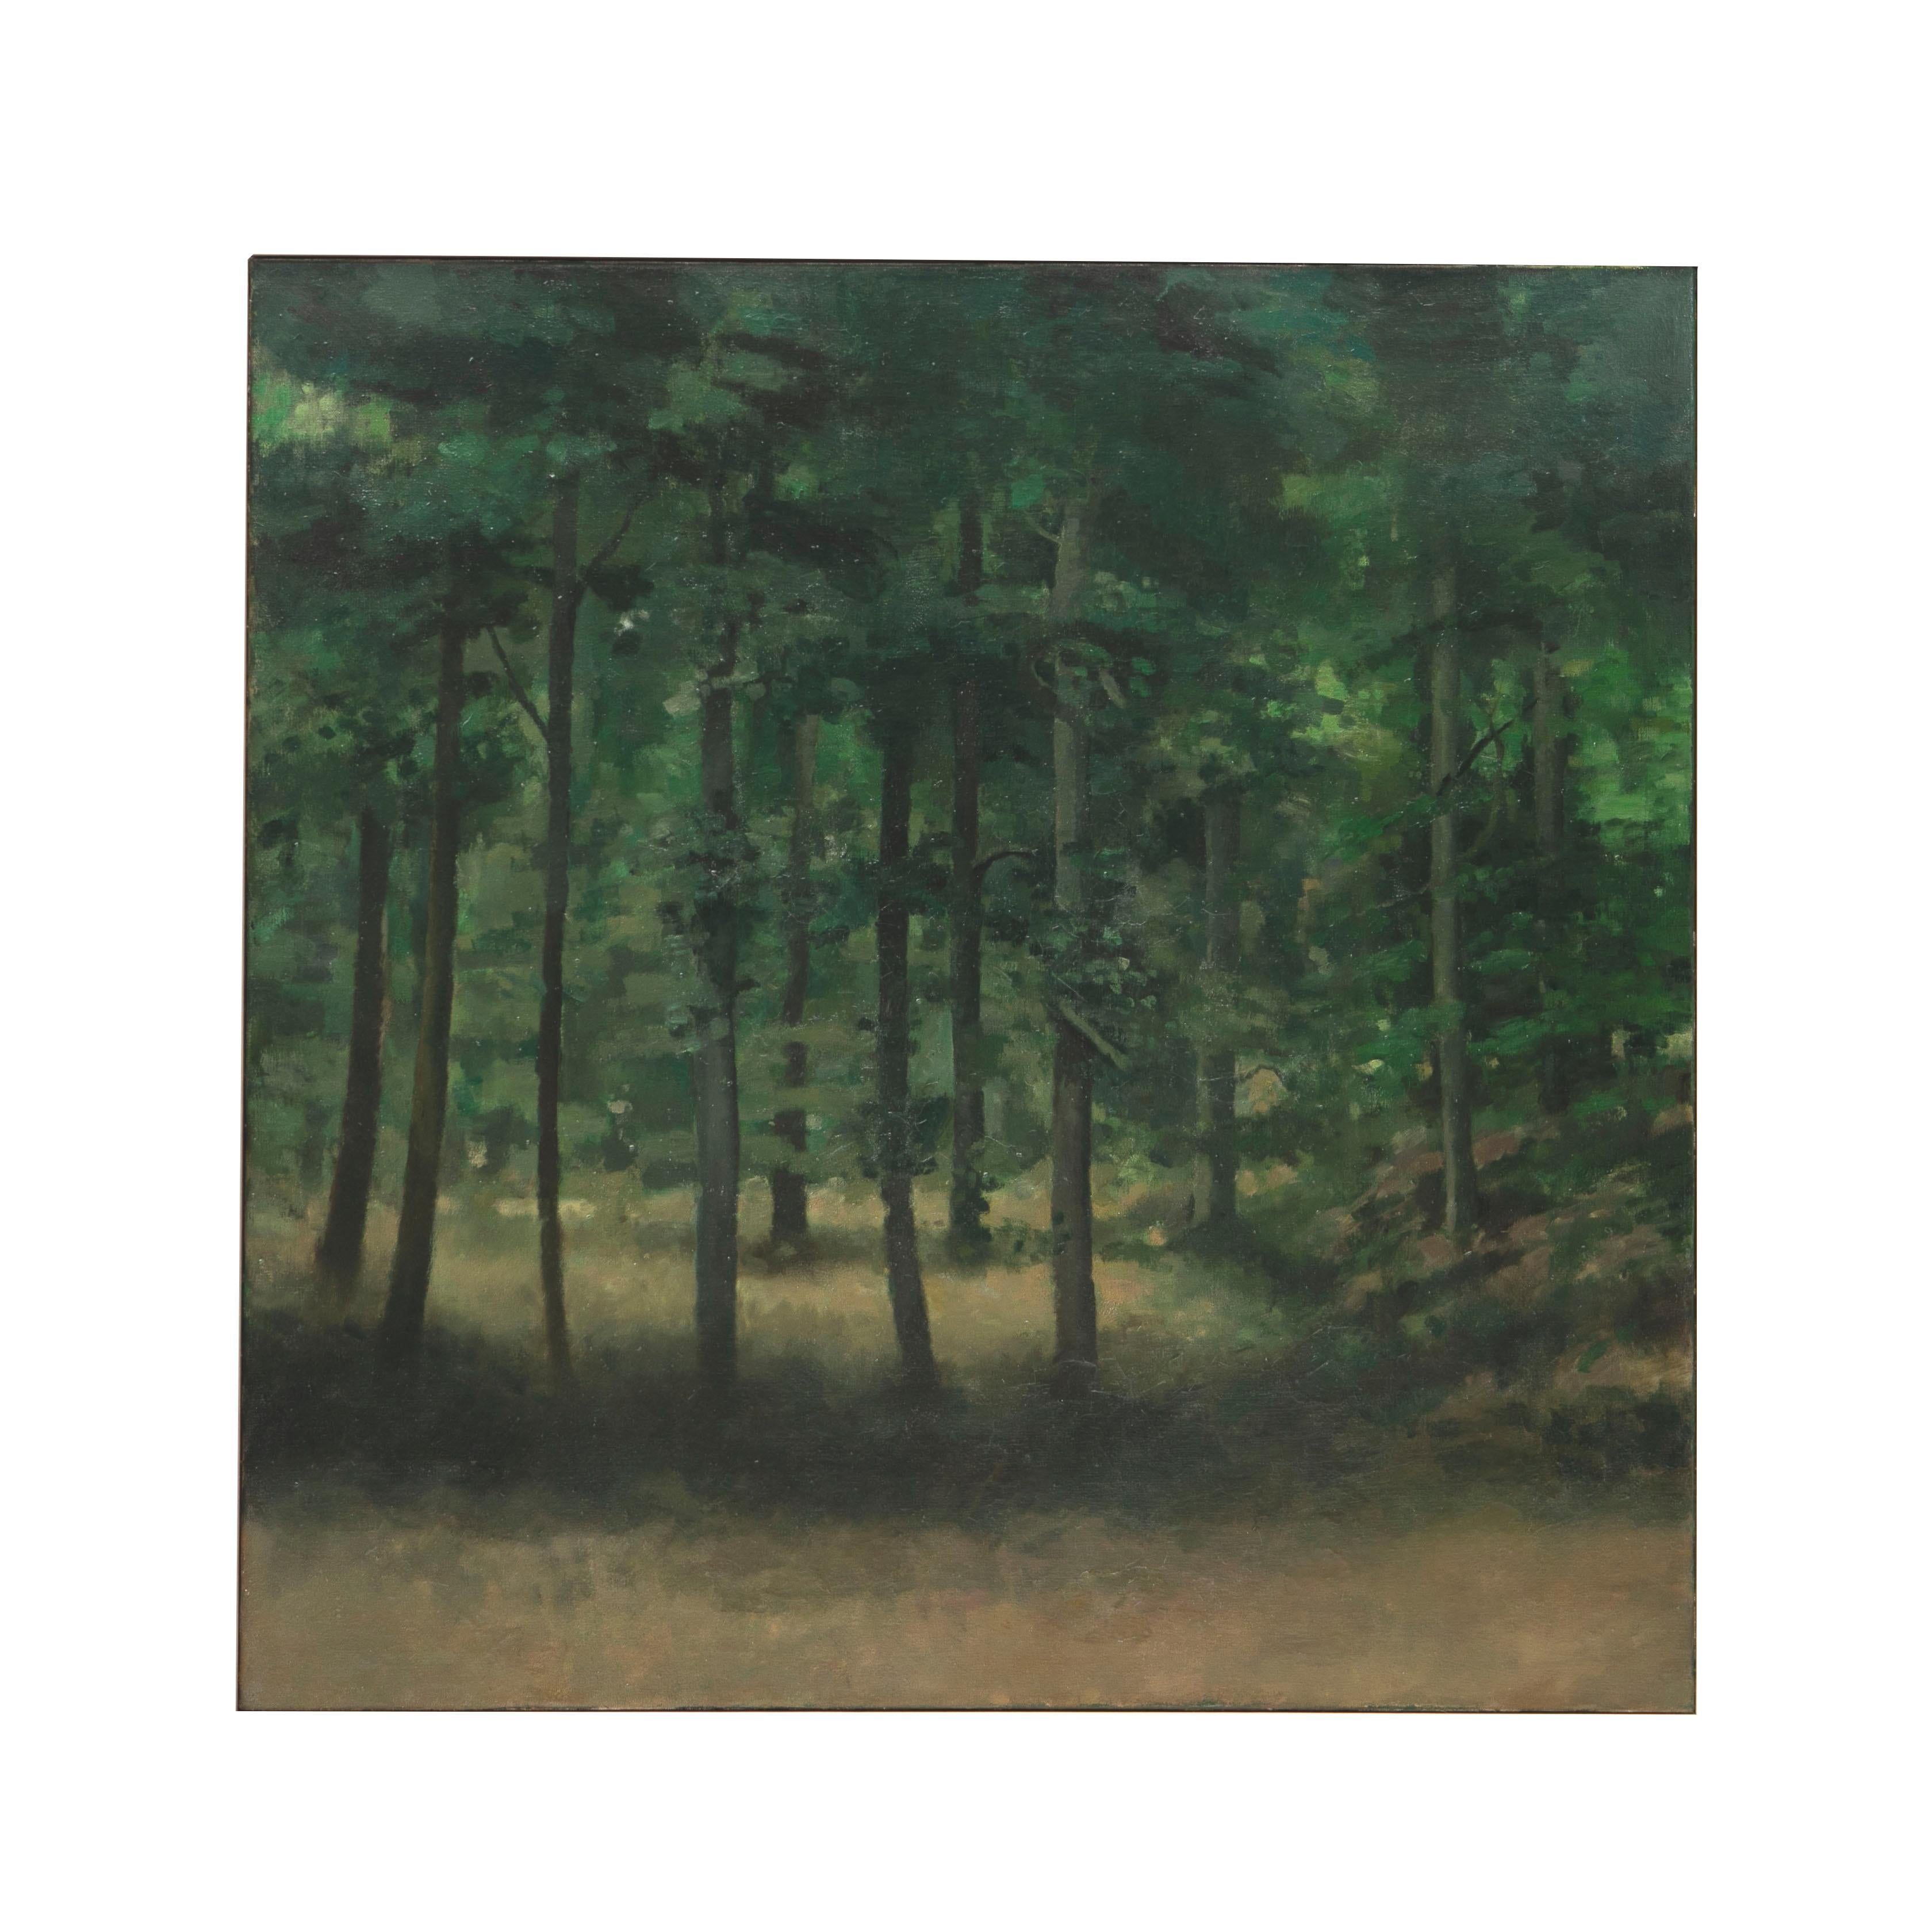 Preben Fjerderholt (Danish 1955-2000).
Oil on canvas landscape painting by Preben Fjederholt. Depicts a beech forest clearing, with the sunlight glowing through the trees.

Dimensions without frame: 100 x 100 cm.
Framed in white pigmented pine